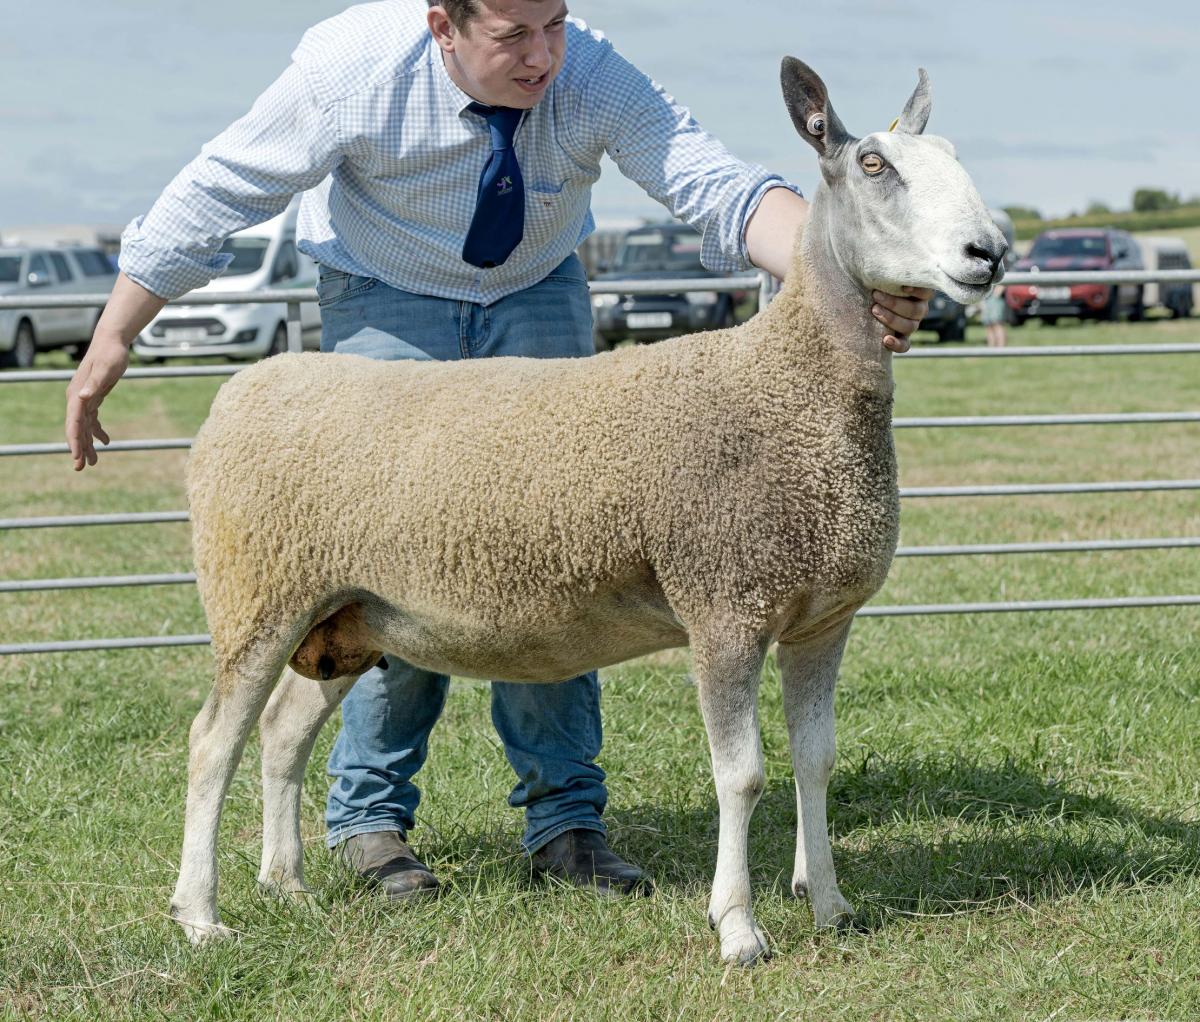 Andrew and James Adam's Bluefaced Leicester ewe was any other breed champion